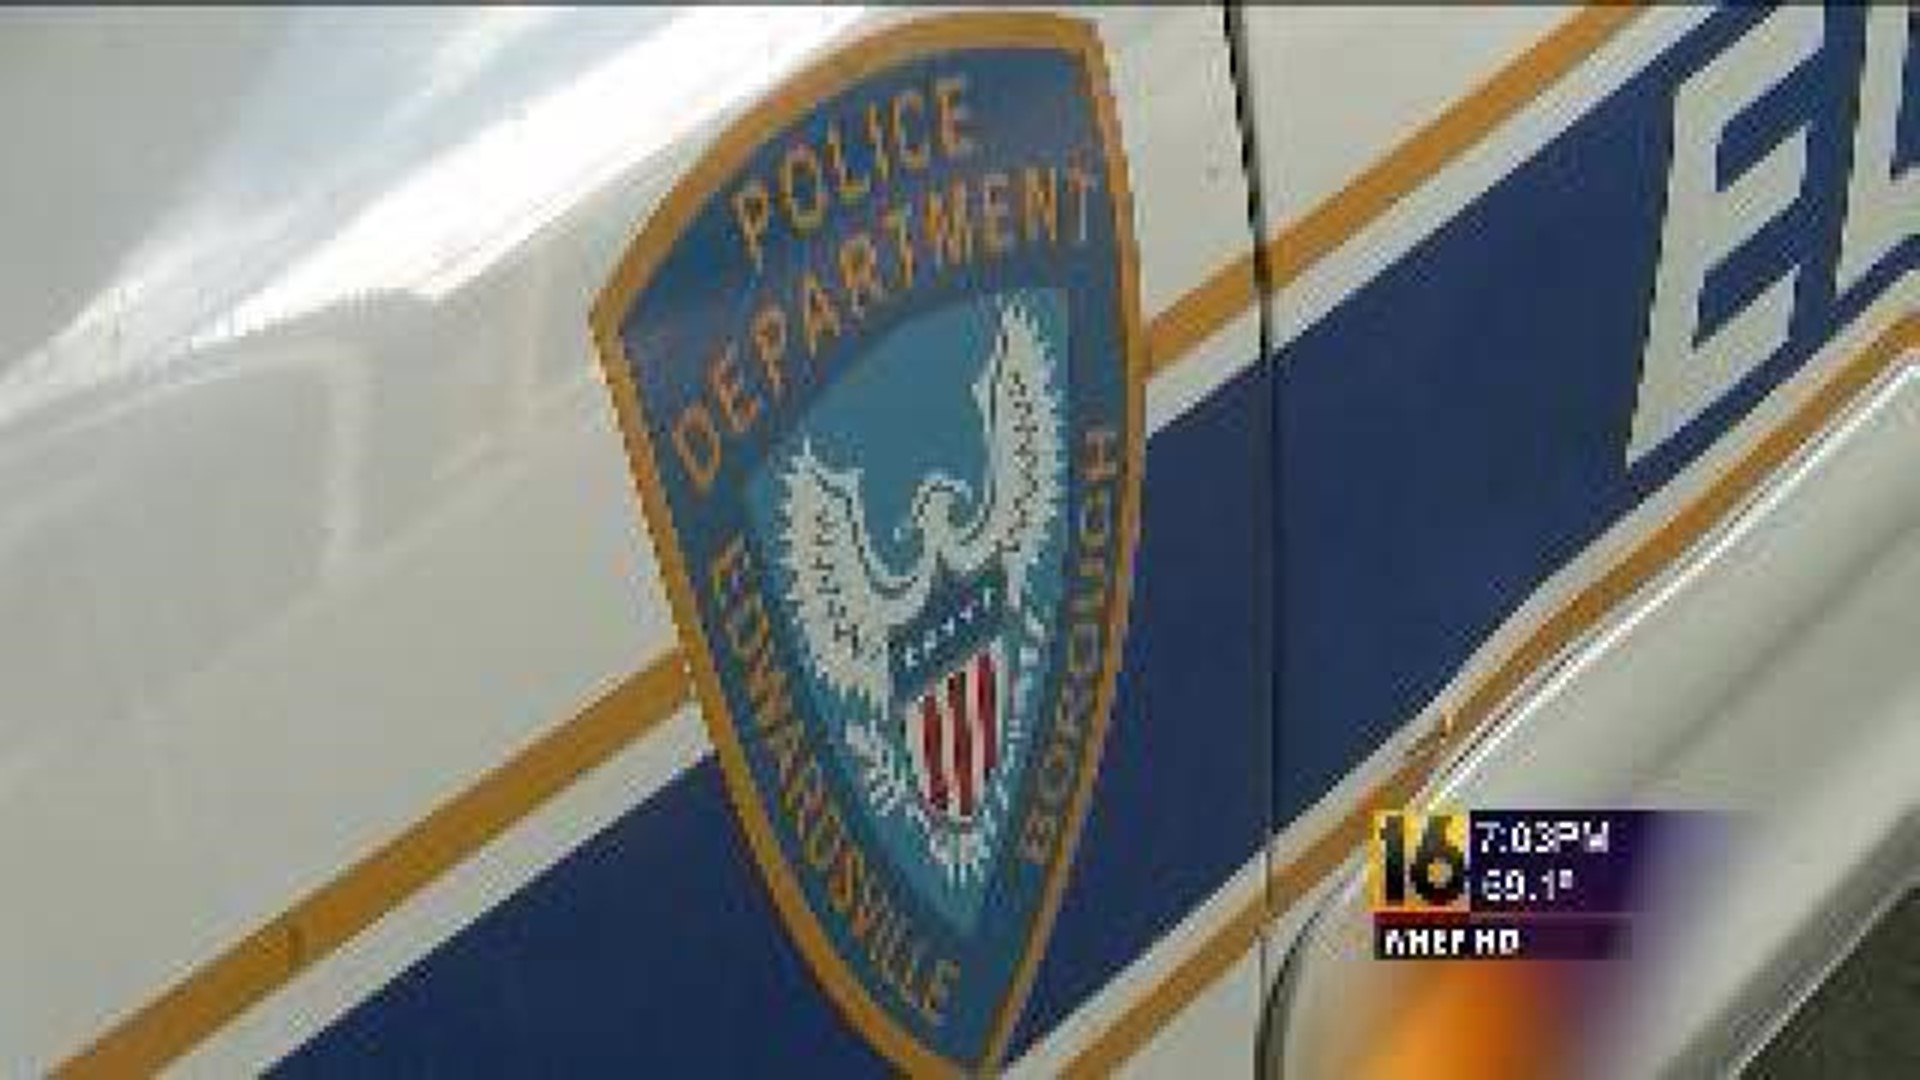 Fewer Police on the Streets in Edwardsville